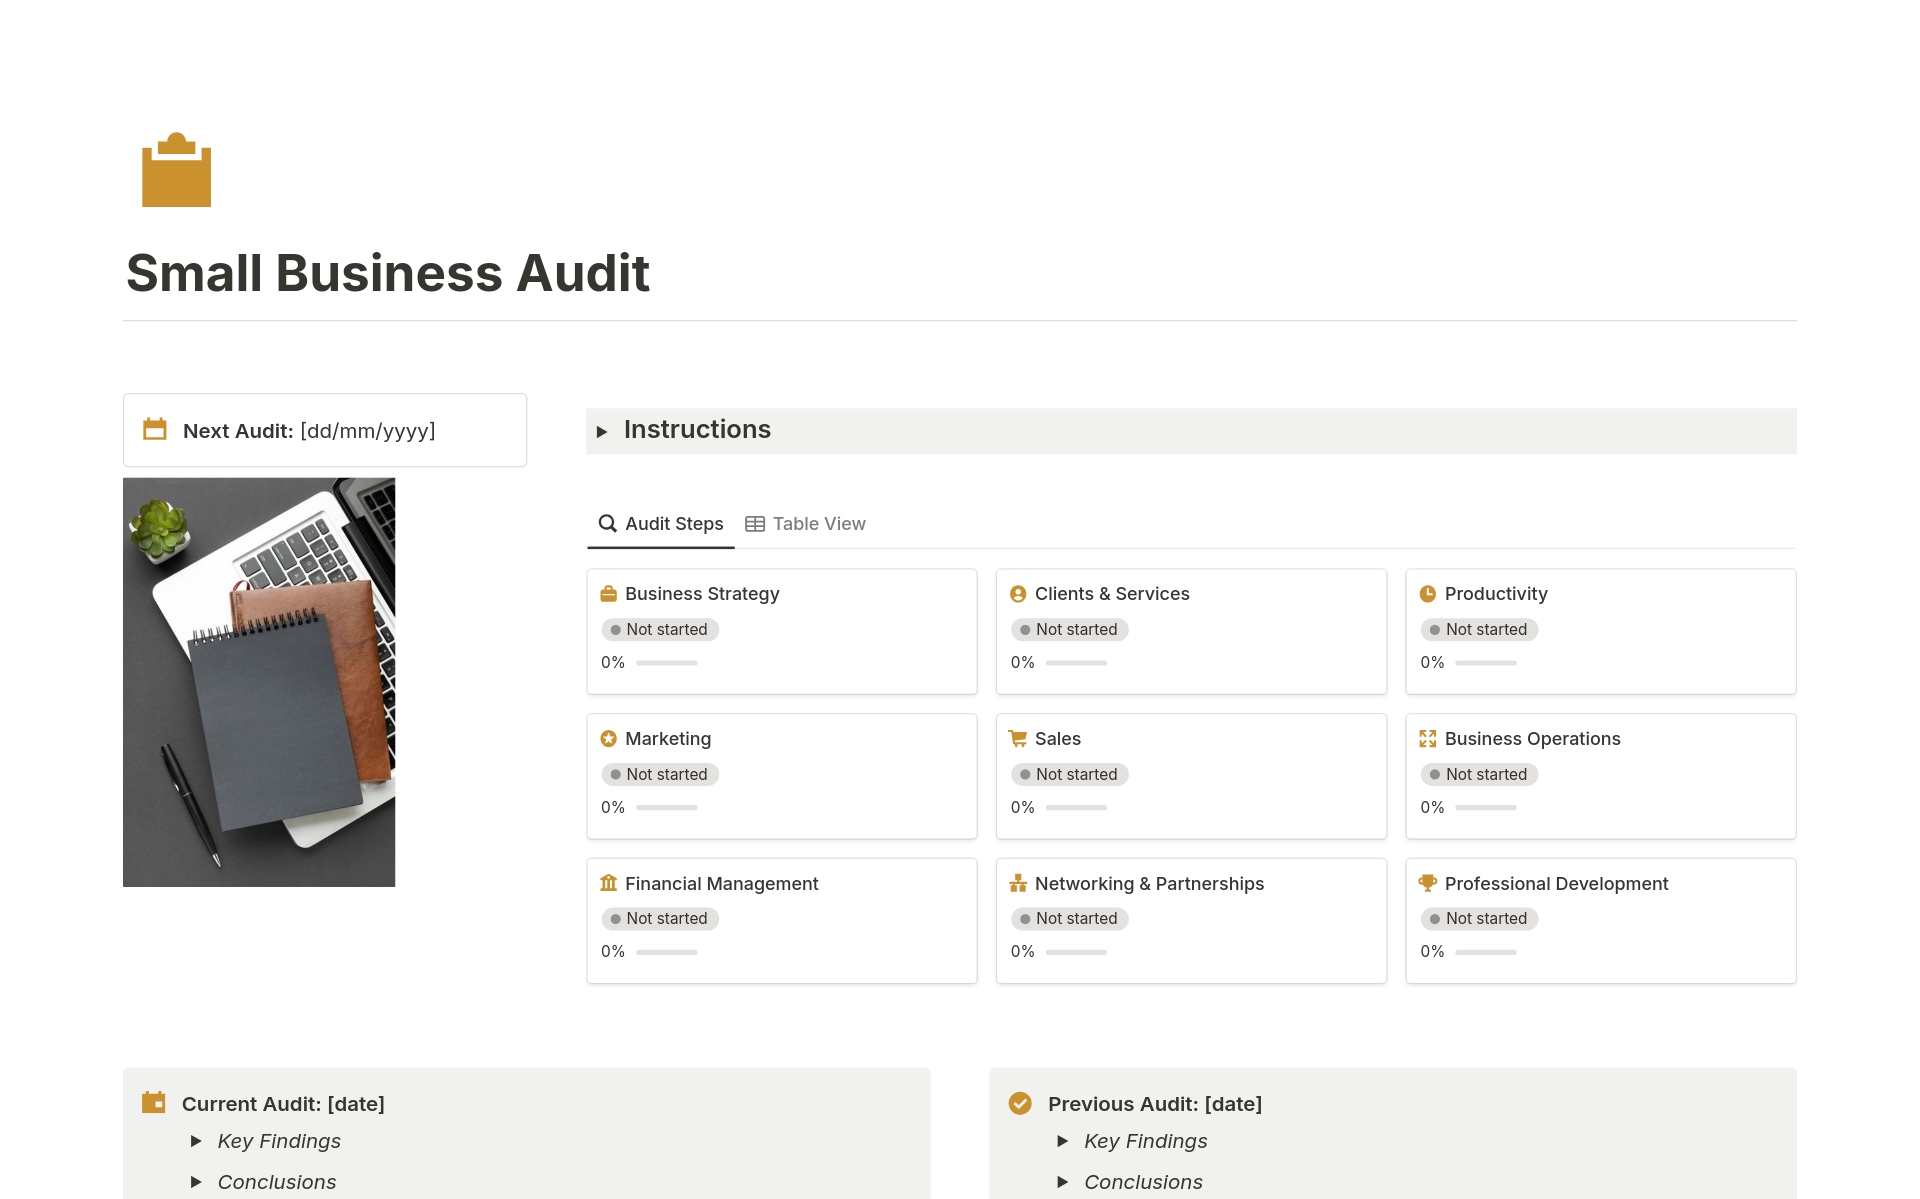 Optimize your business performance with the comprehensive Small Business Audit - FREE Template

A complete, step-by-step guide to assess and improve all aspects of your business.